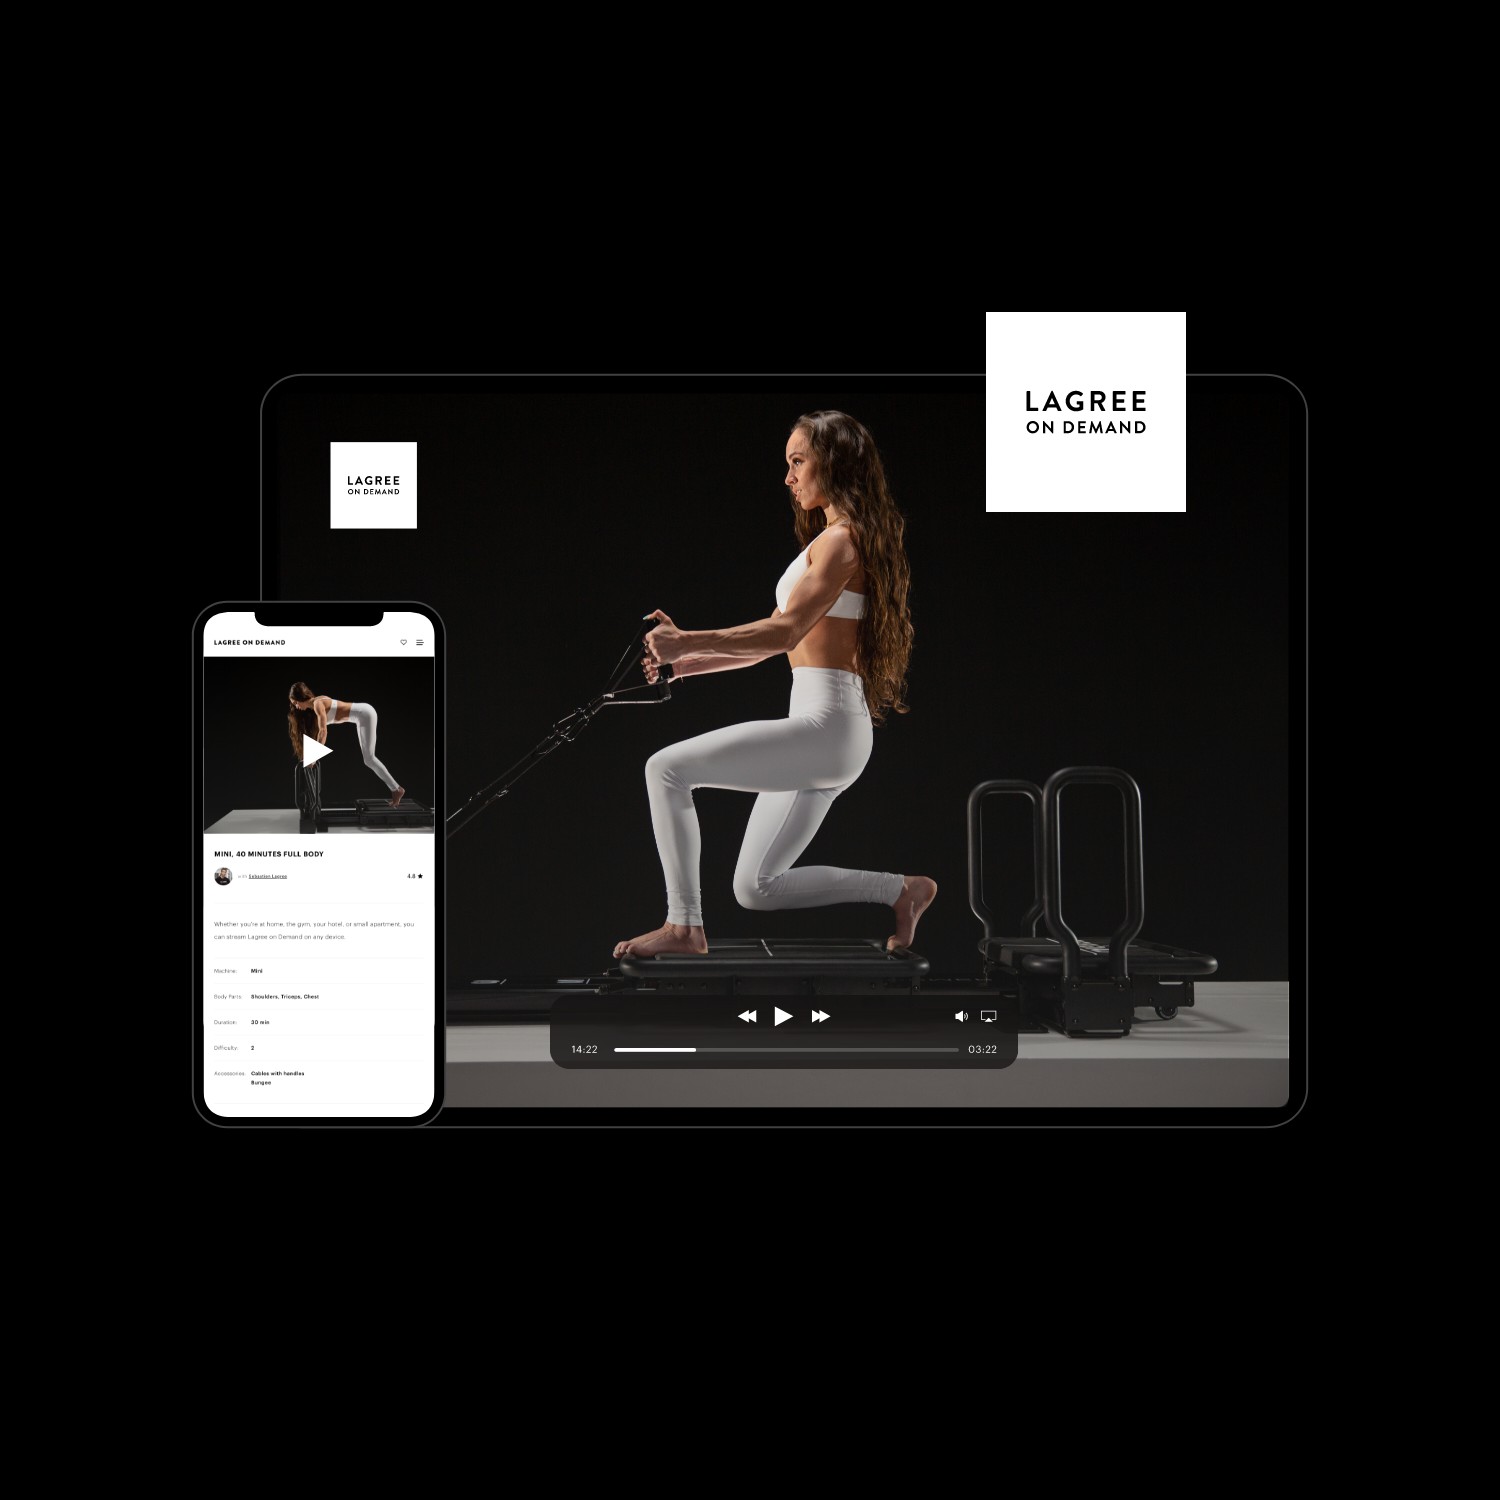 Lagree Fitness The Micro #1 Lagree workout equipment makes home exercise so  easy » Gadget Flow